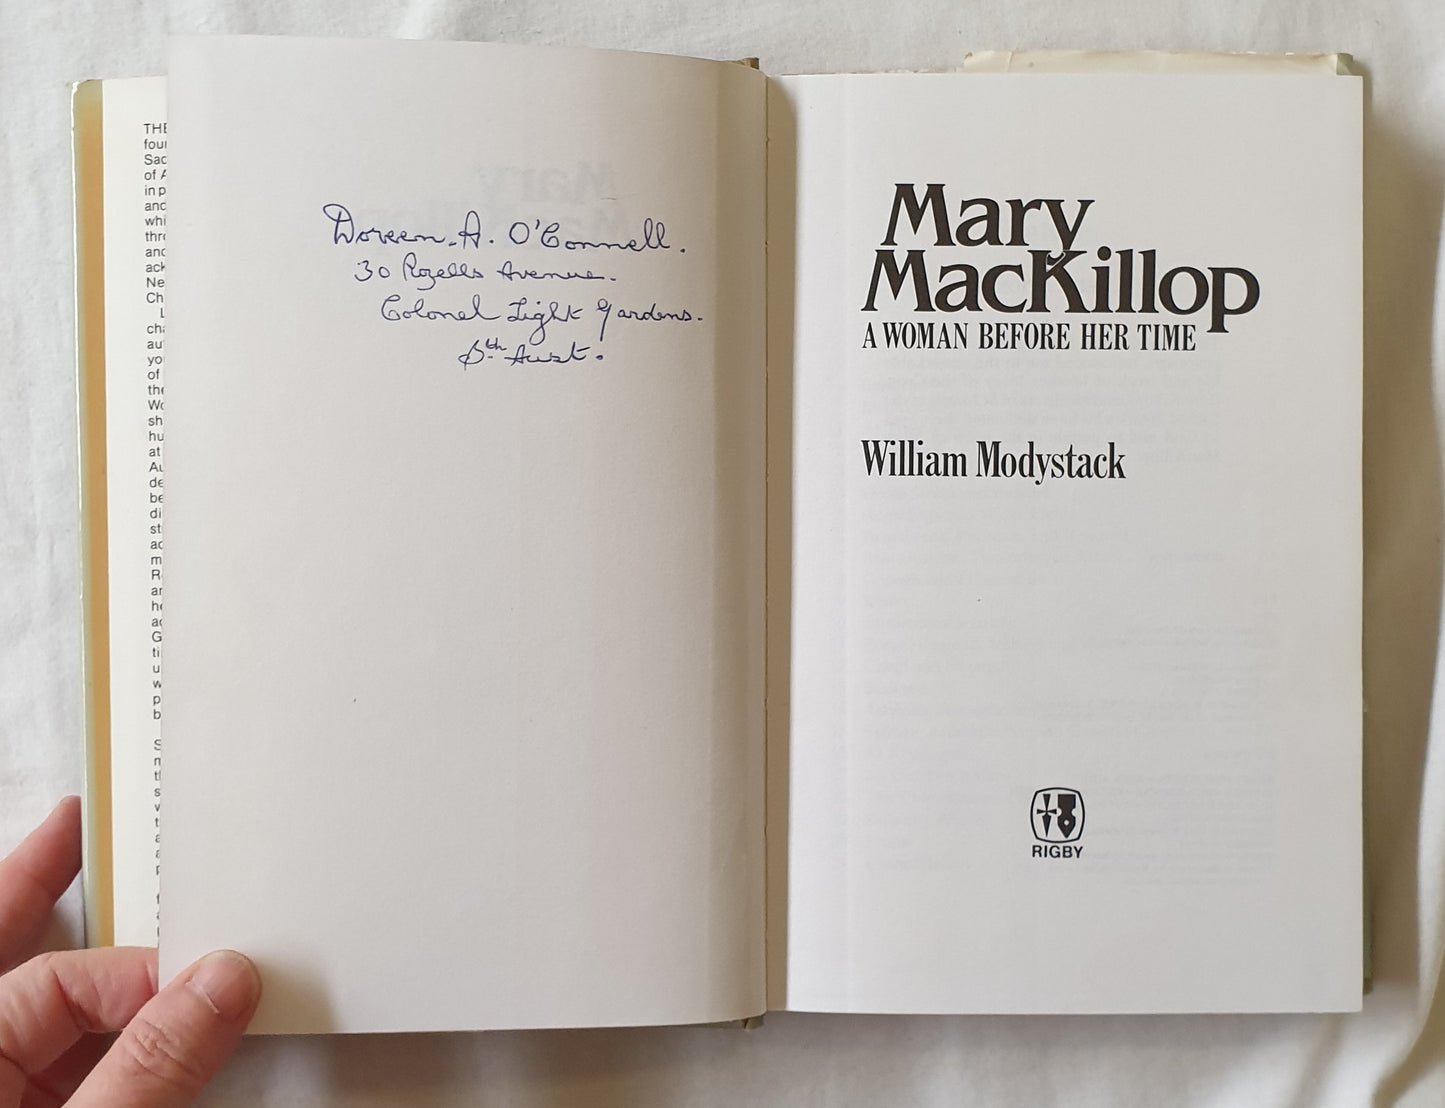 Mary Mackillop: A Woman Before Her Time by William Modystack